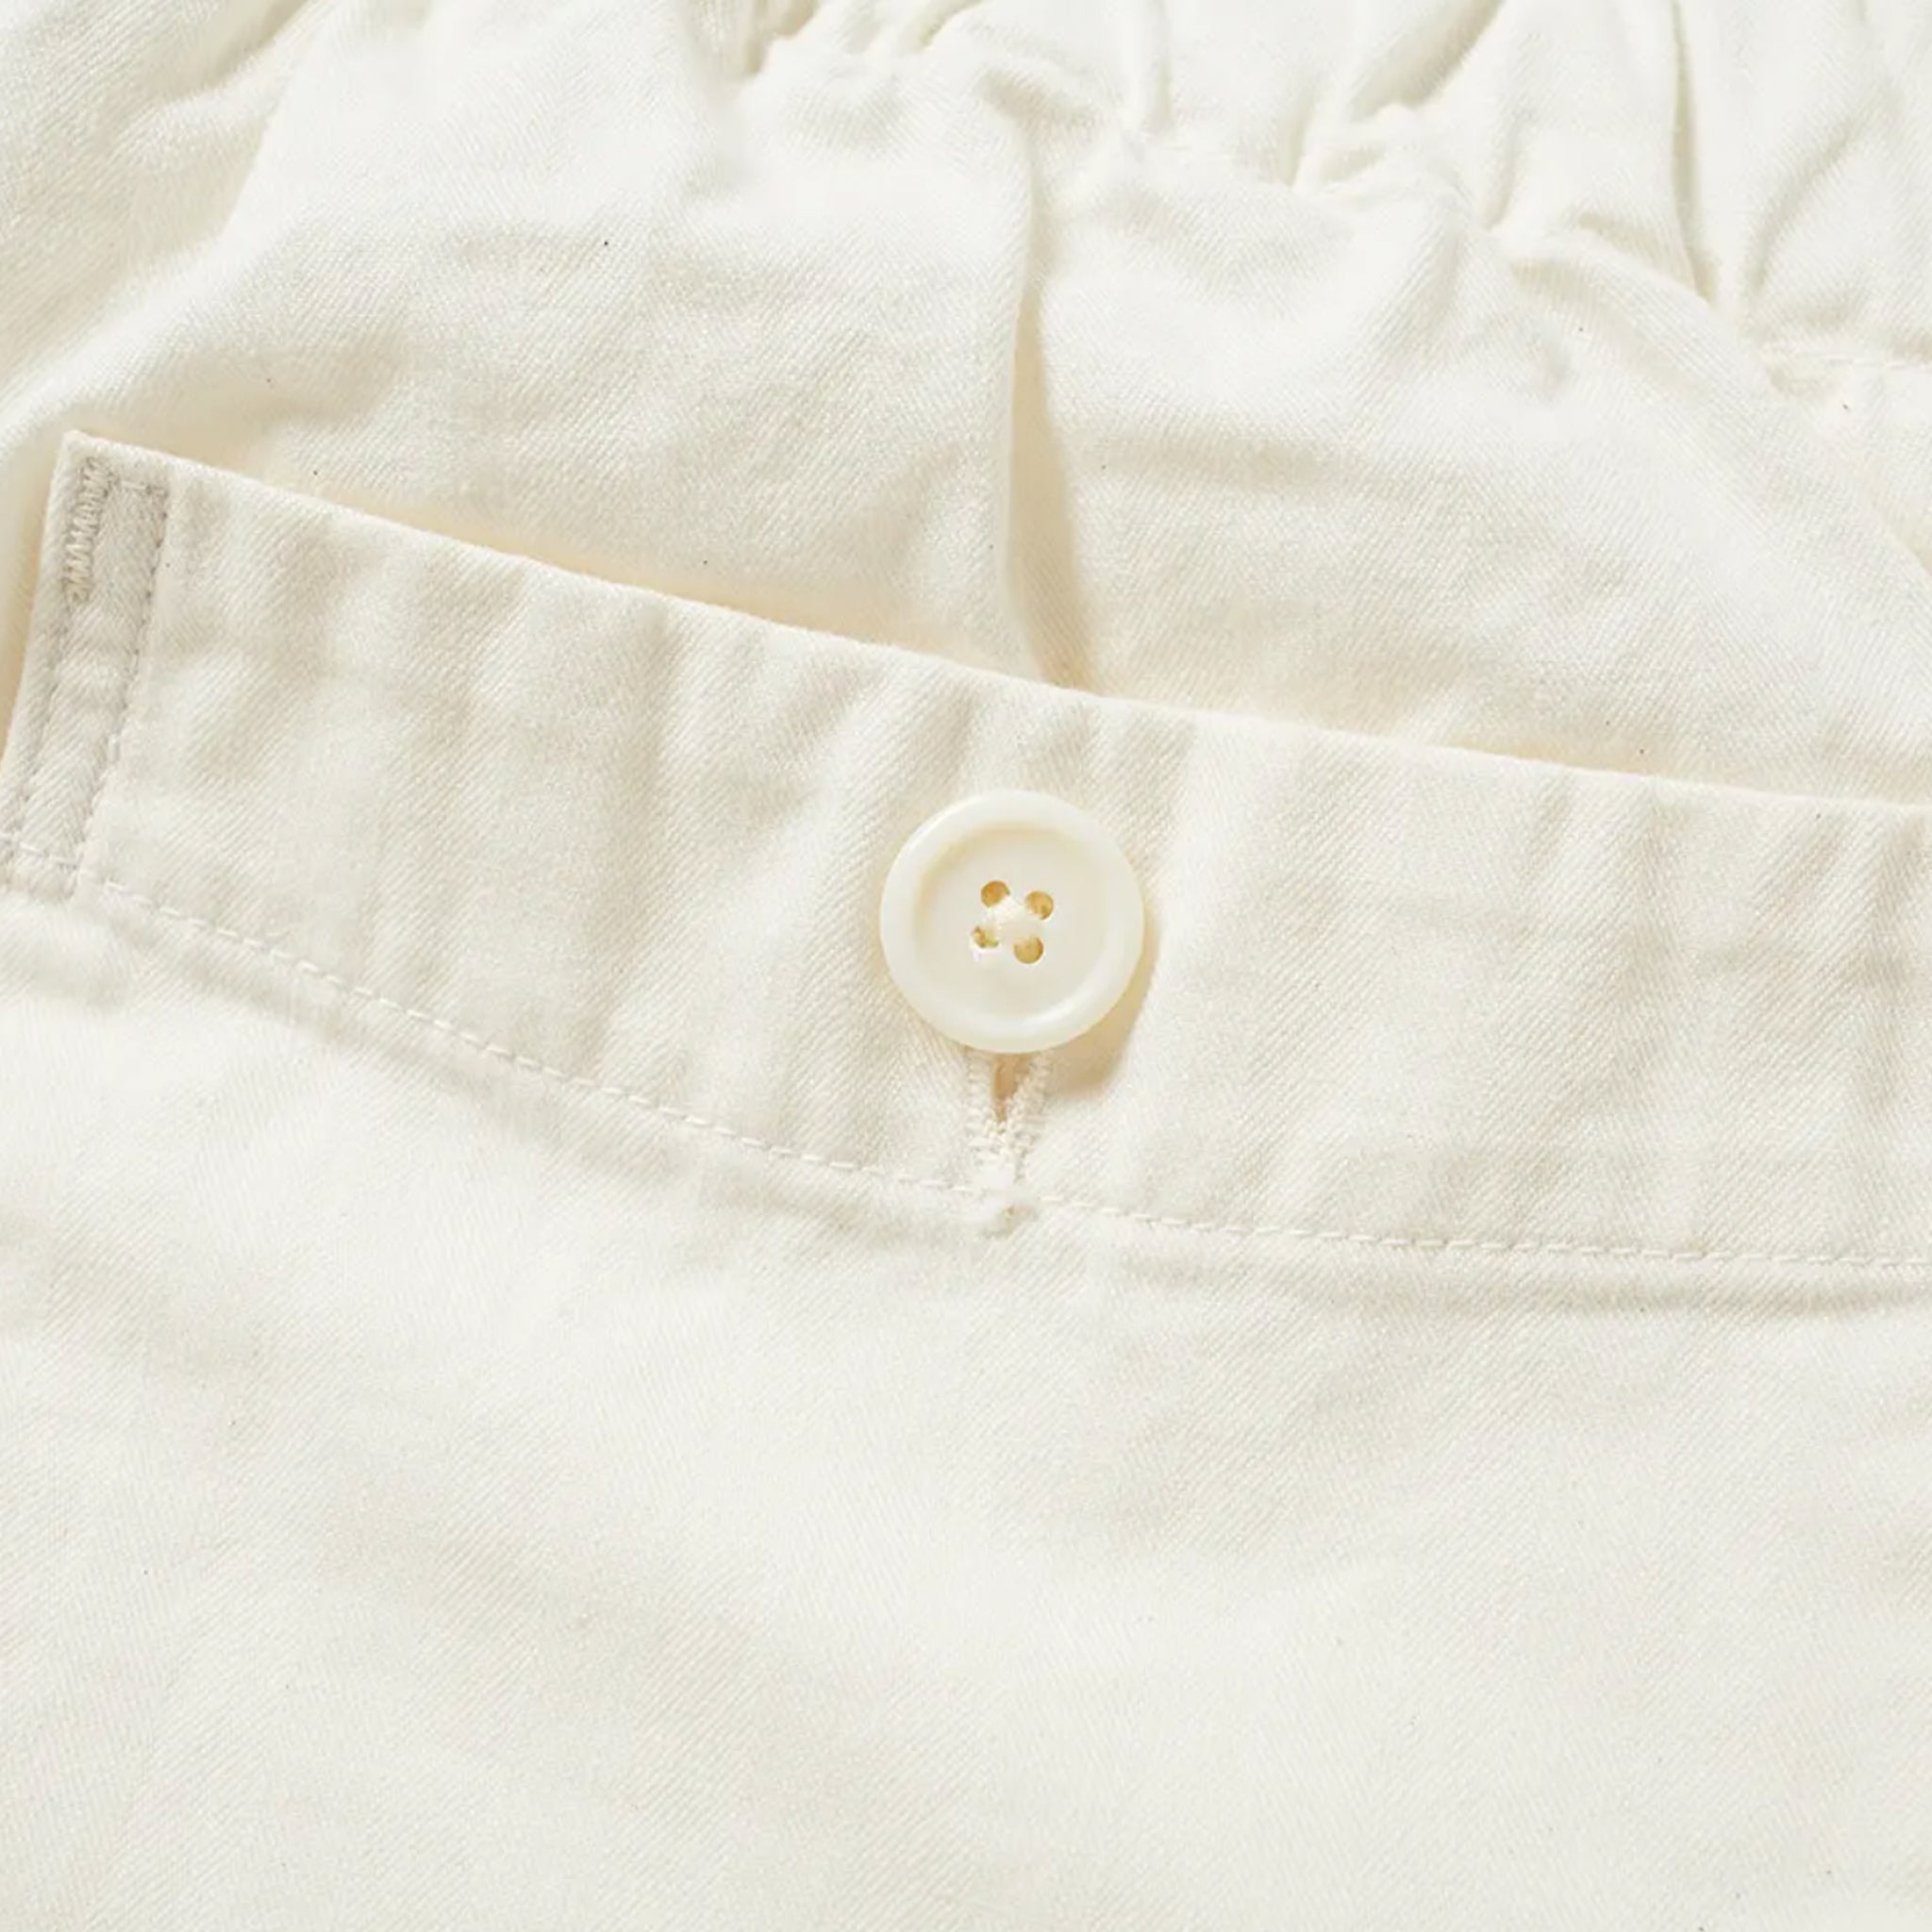 ORSLOW FRENCH WORK PANTS